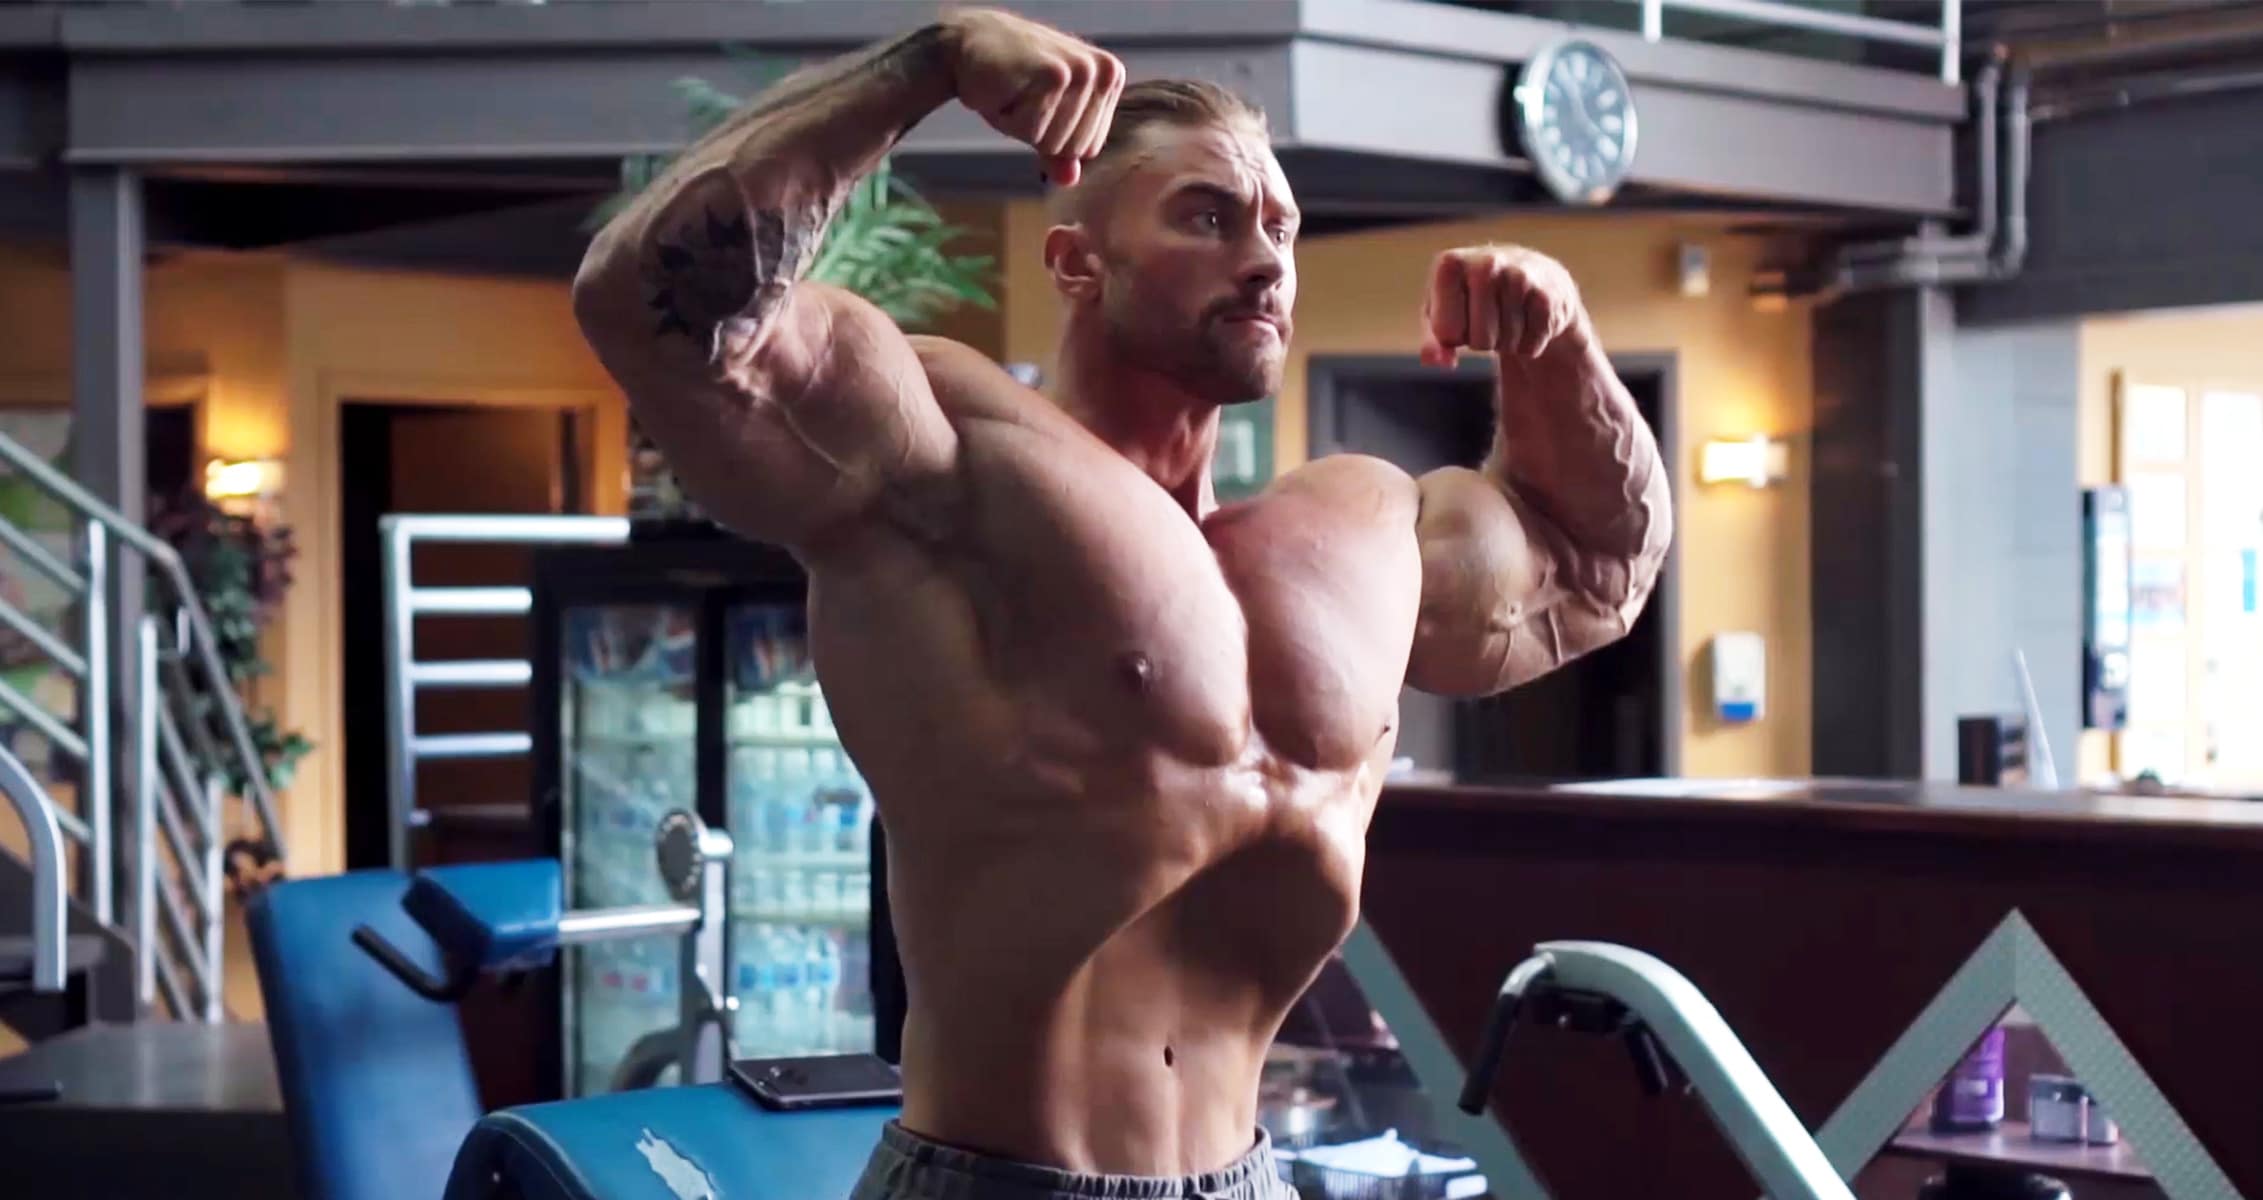 Chris Bumstead Profile & Stats